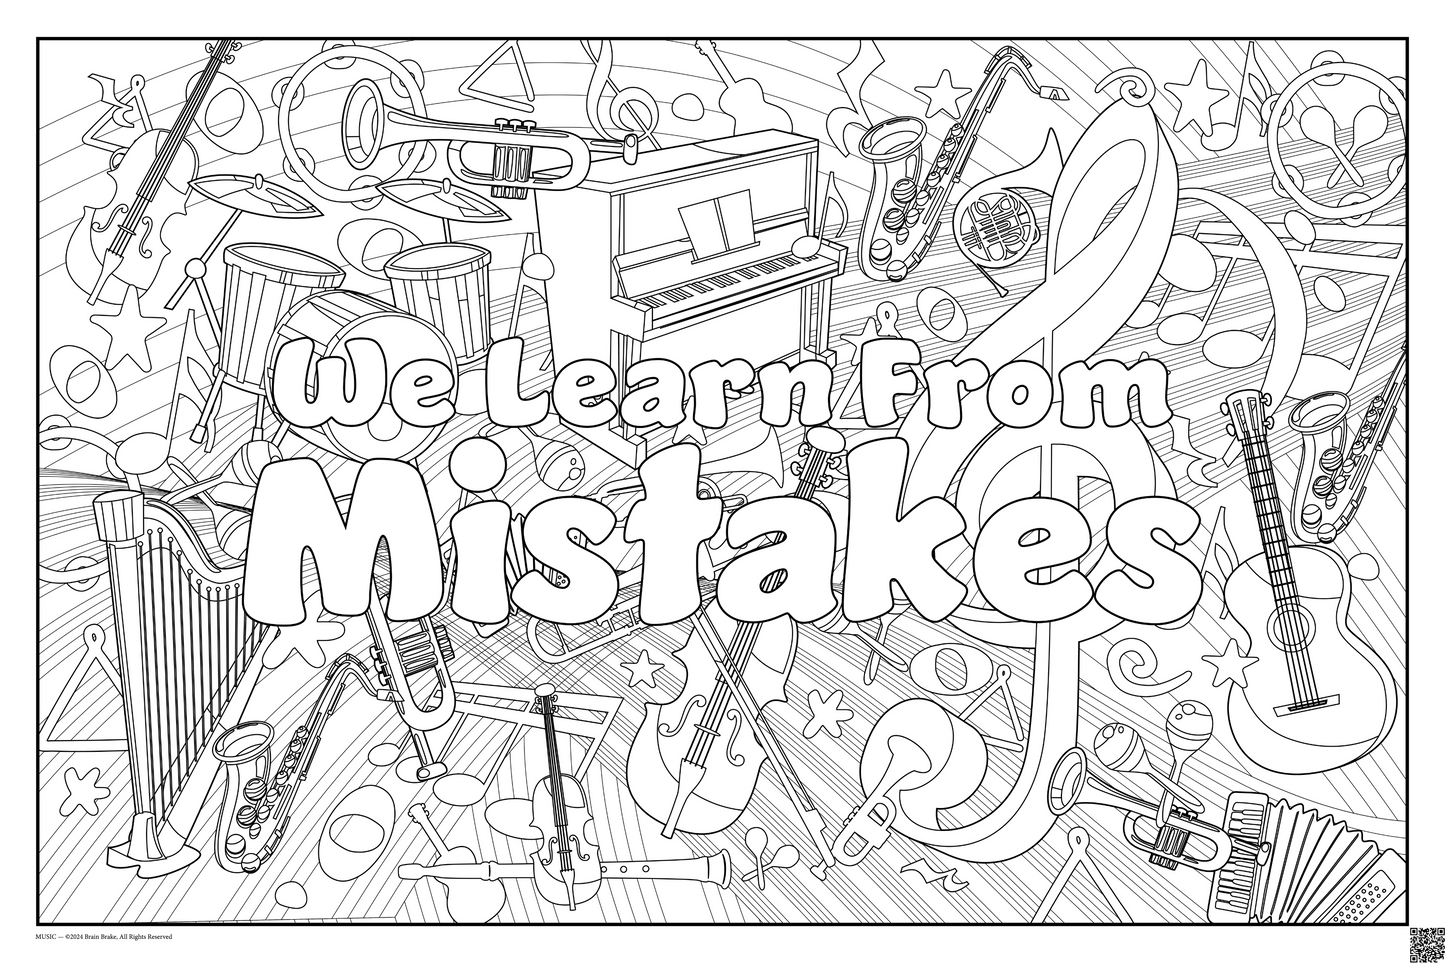 Calming Corner: We Learn From Mistakes